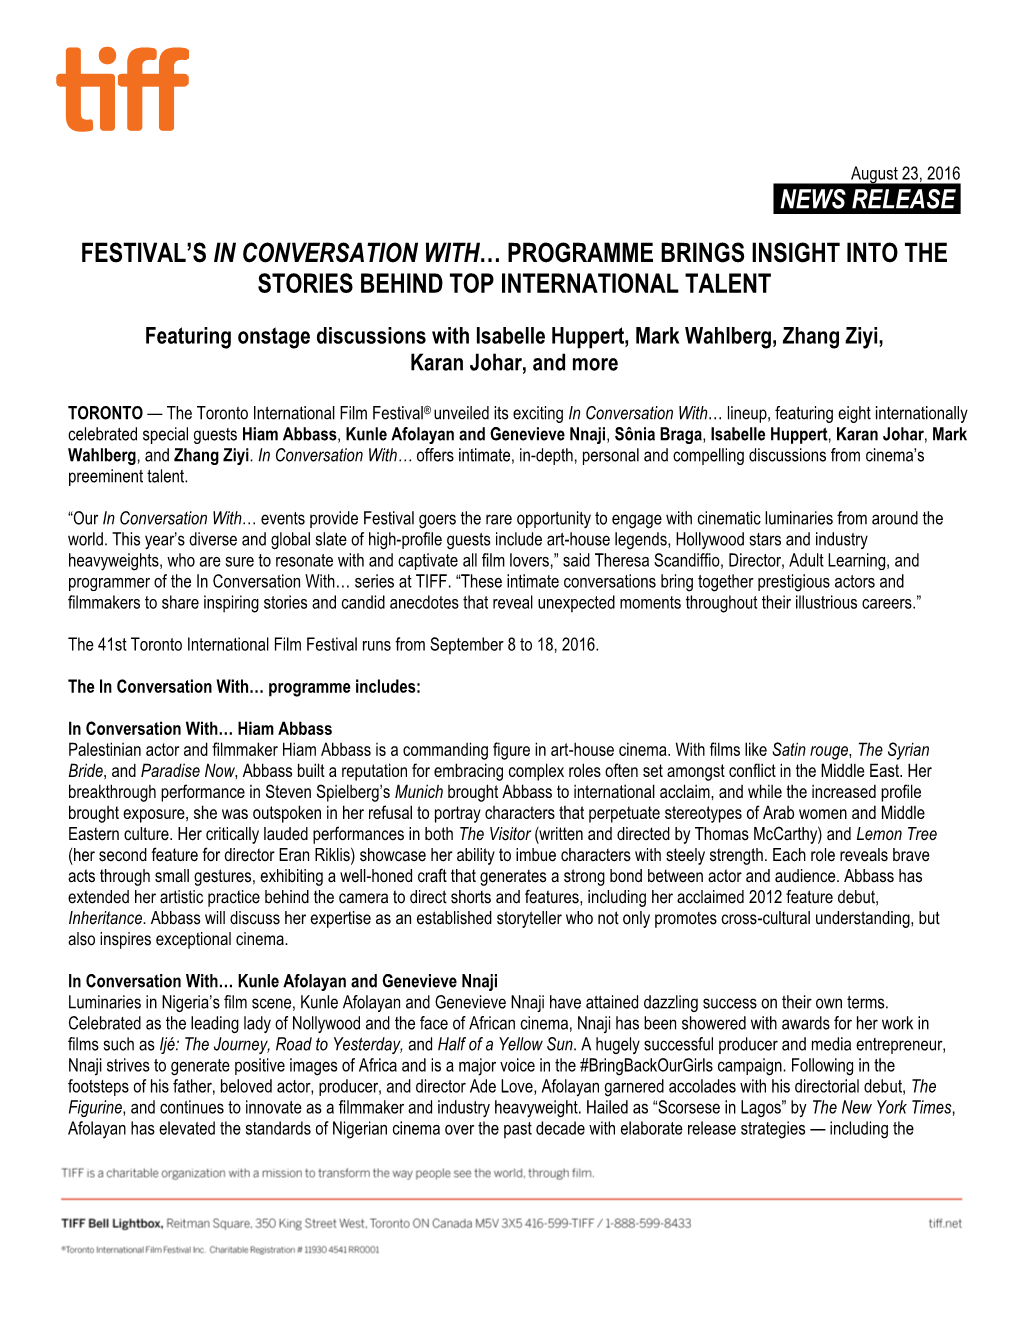 News Release. Festival's in Conversation